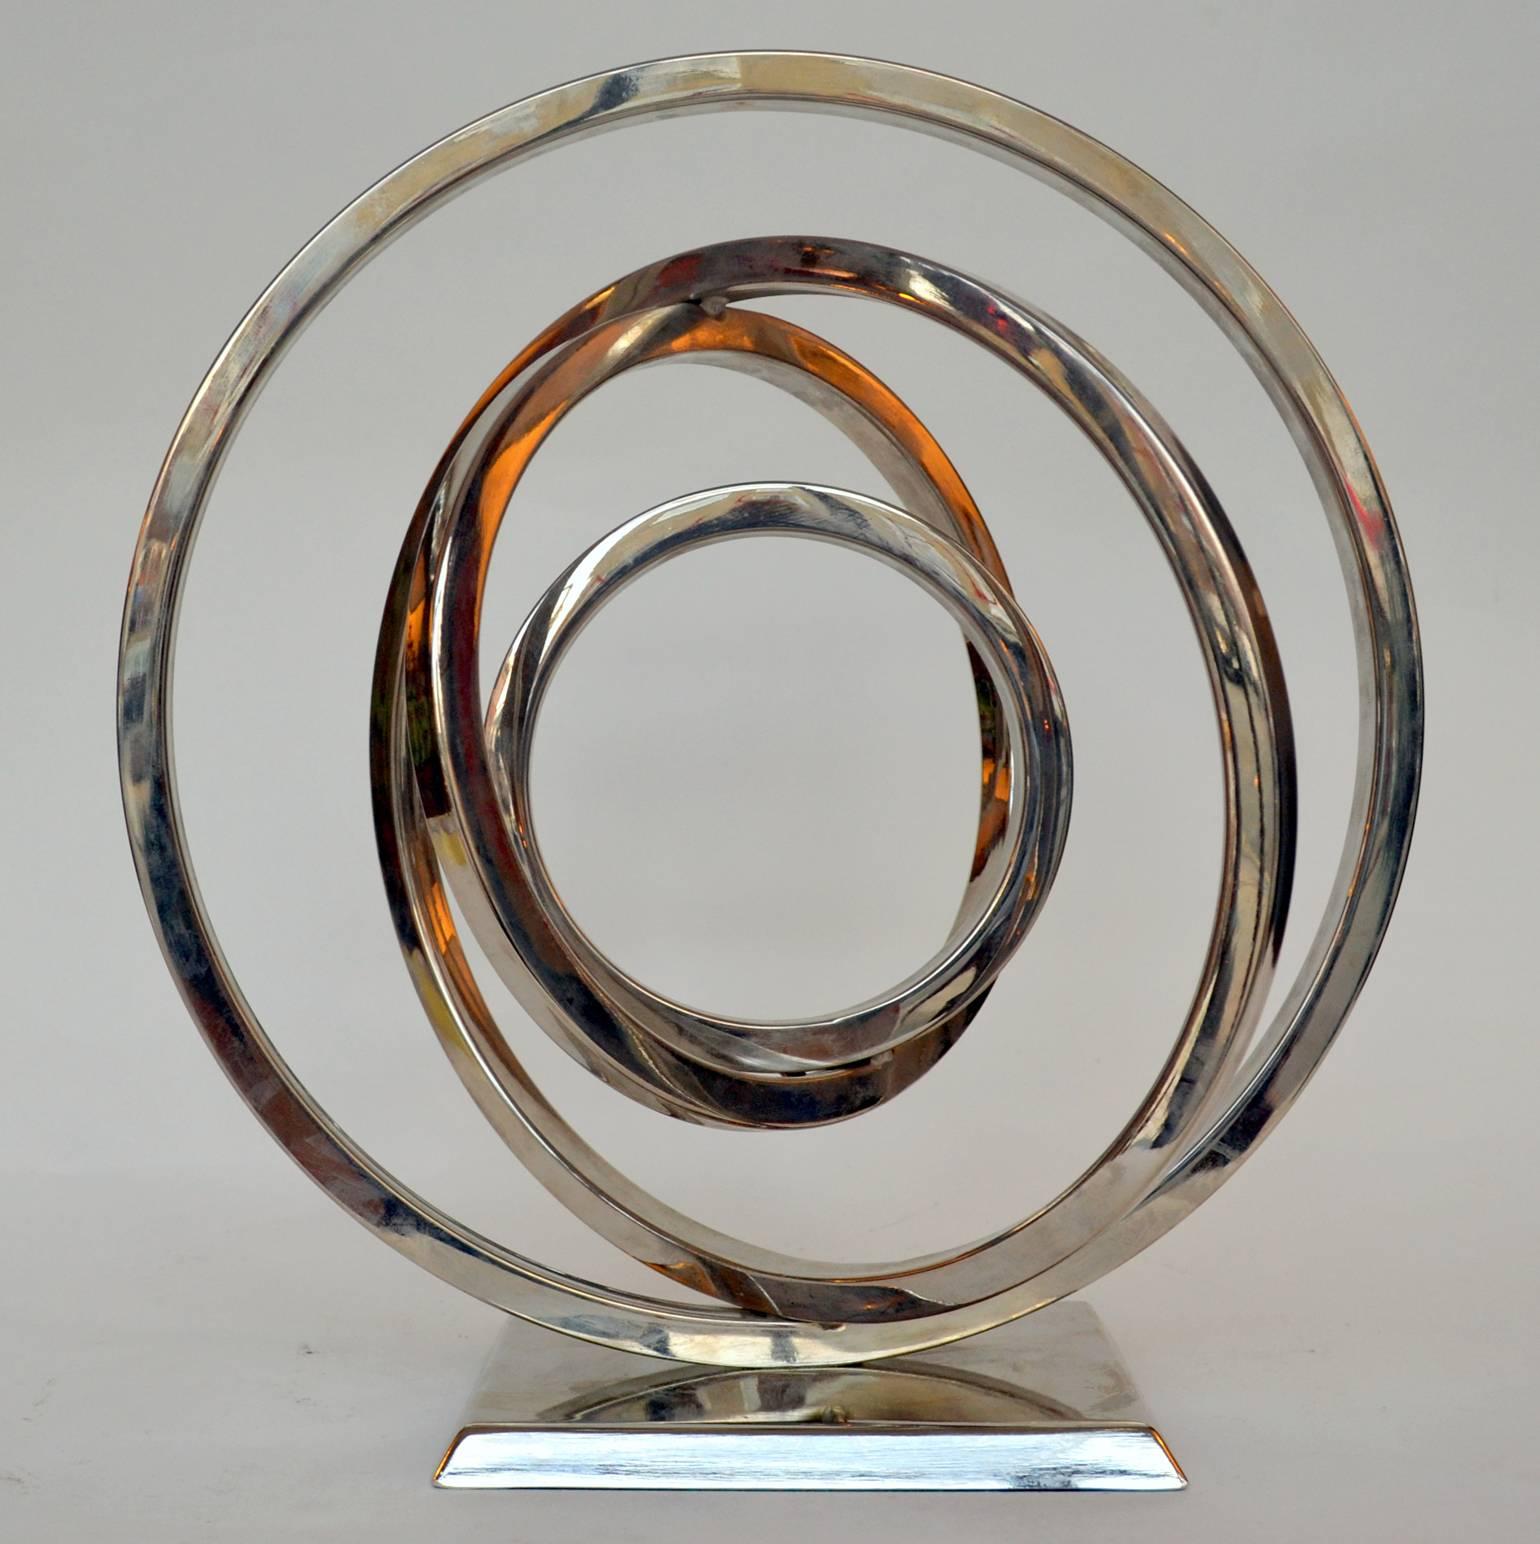 Atomic shape sculpture constructed in square tubular rings in chrome metal.